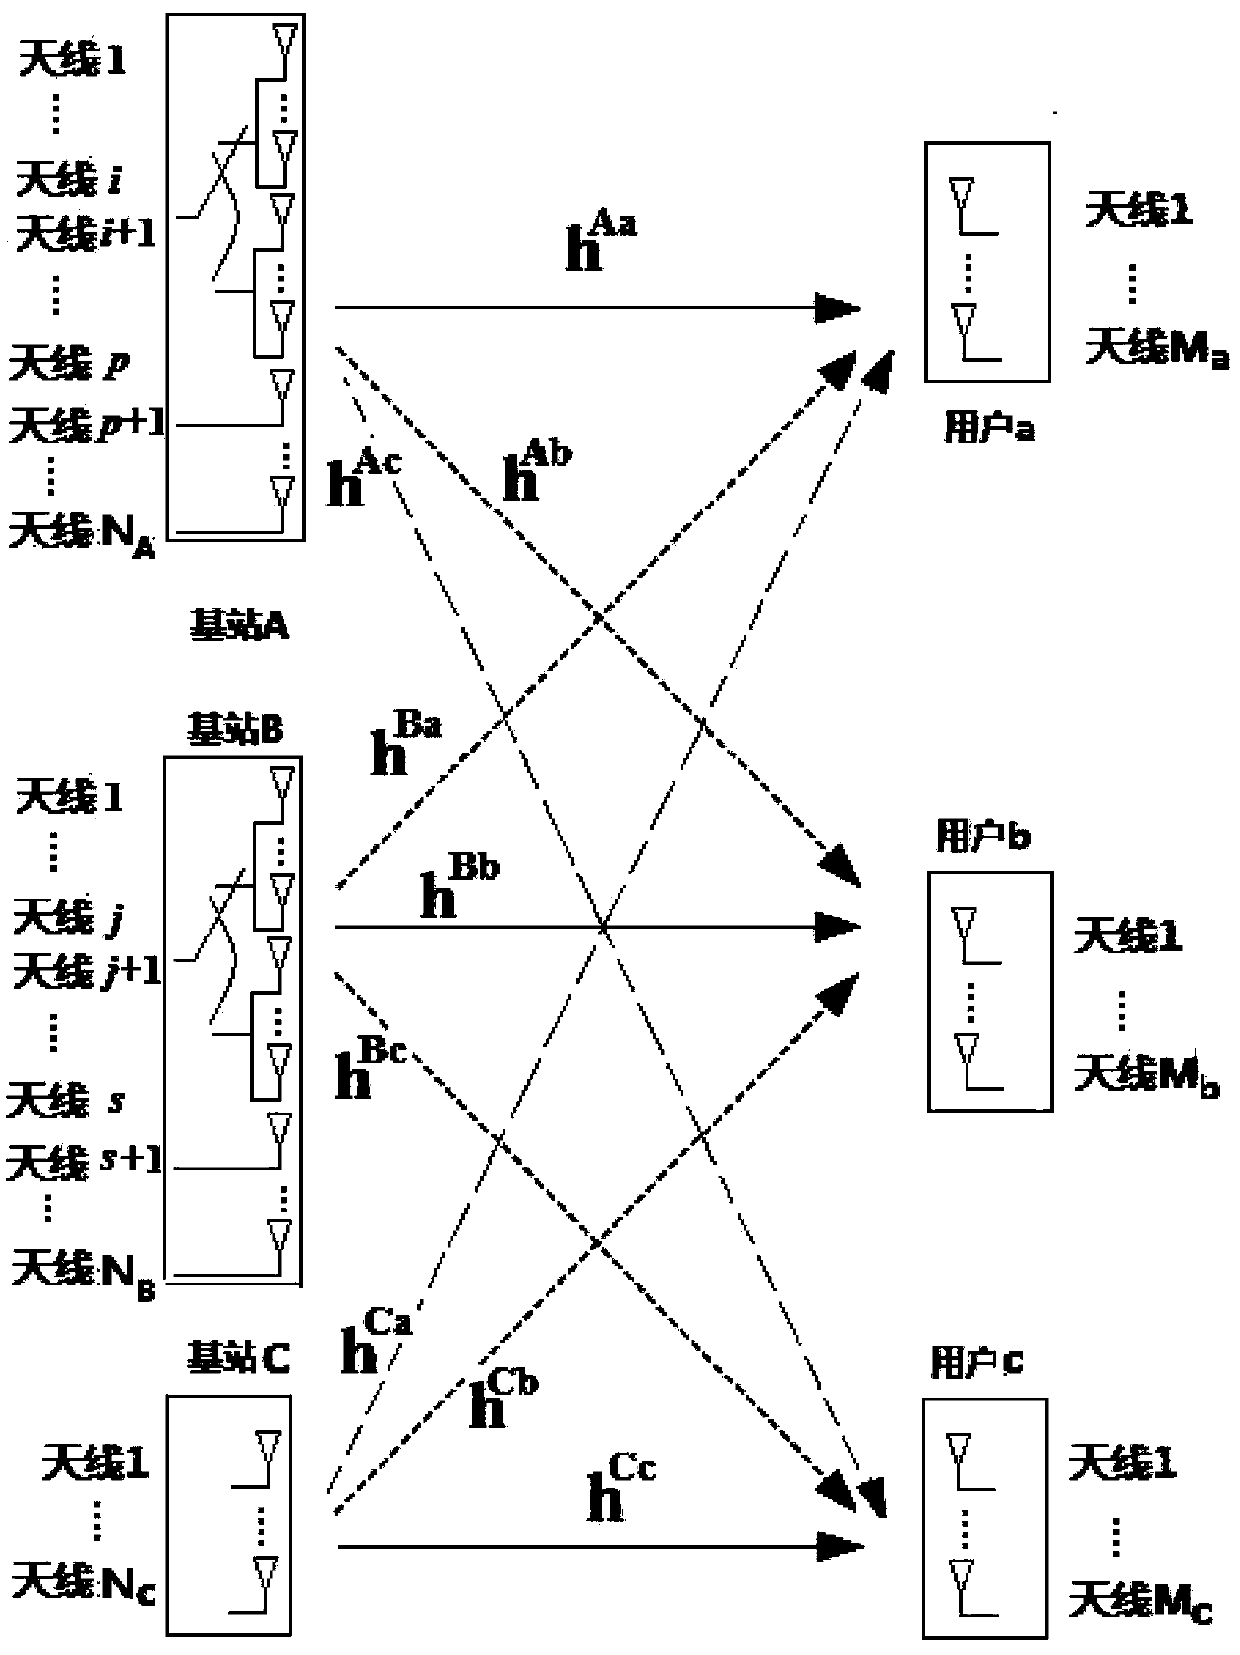 Three-cell blind interference suppression method based on energy efficiency priority